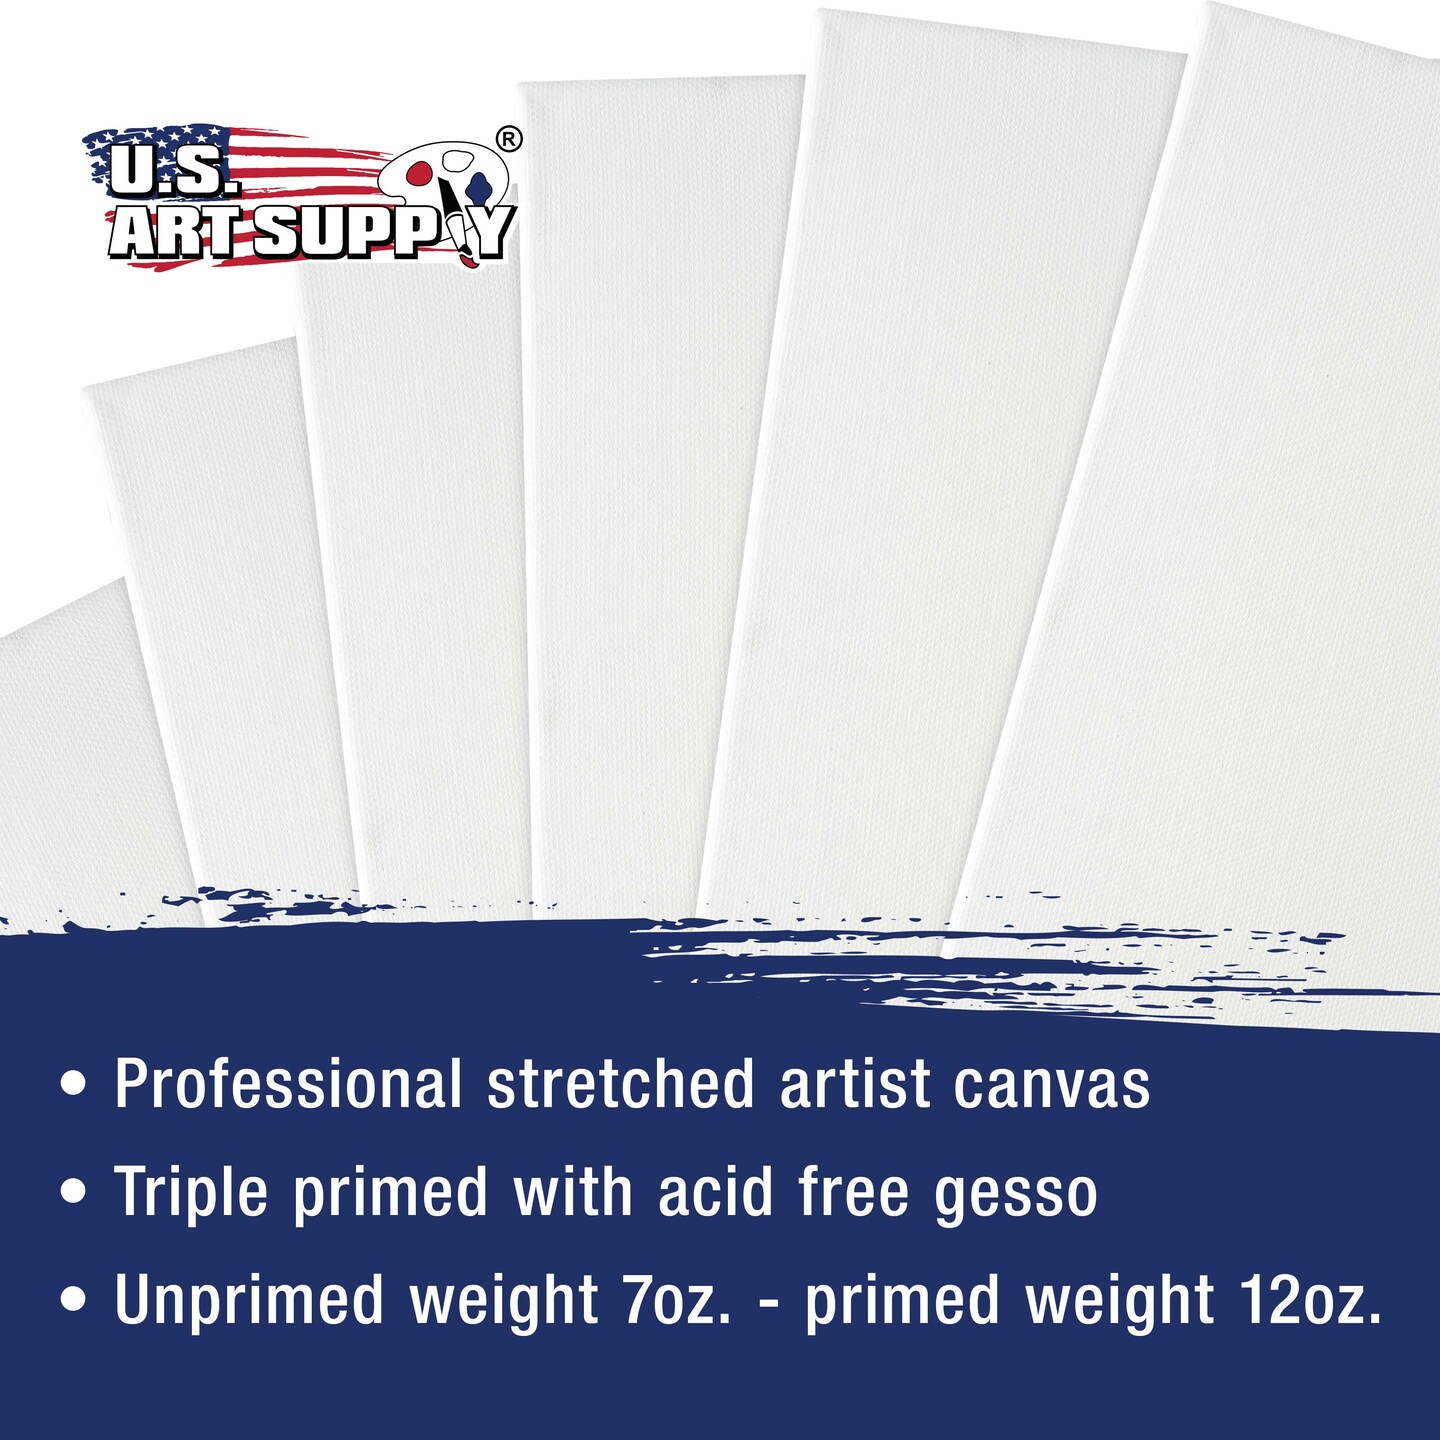 10 Assorted Medium Stretched Artist Paint Canvases (10 Pack)